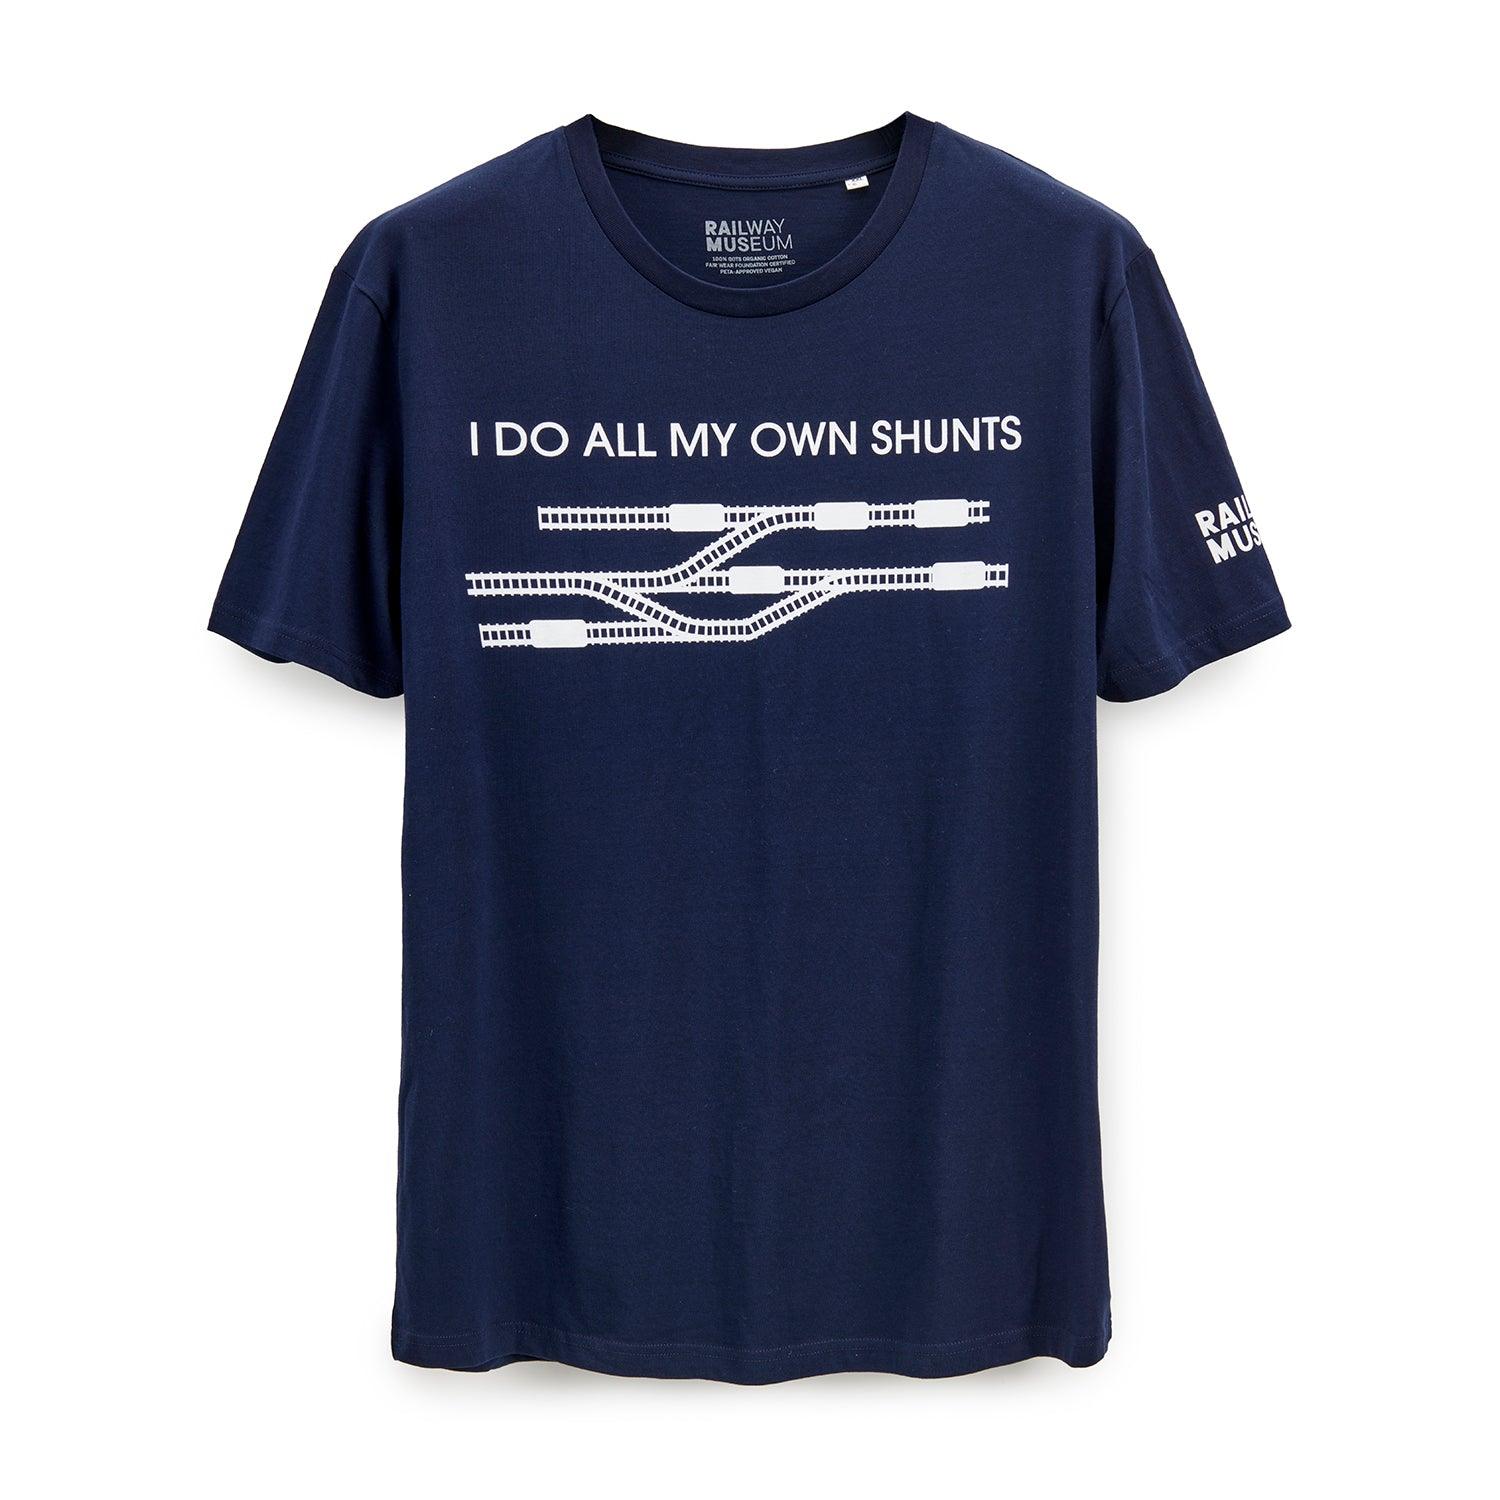 National Railway Museum I Do All My Own Shunts T-shirt - Clothing - Science Museum Shop